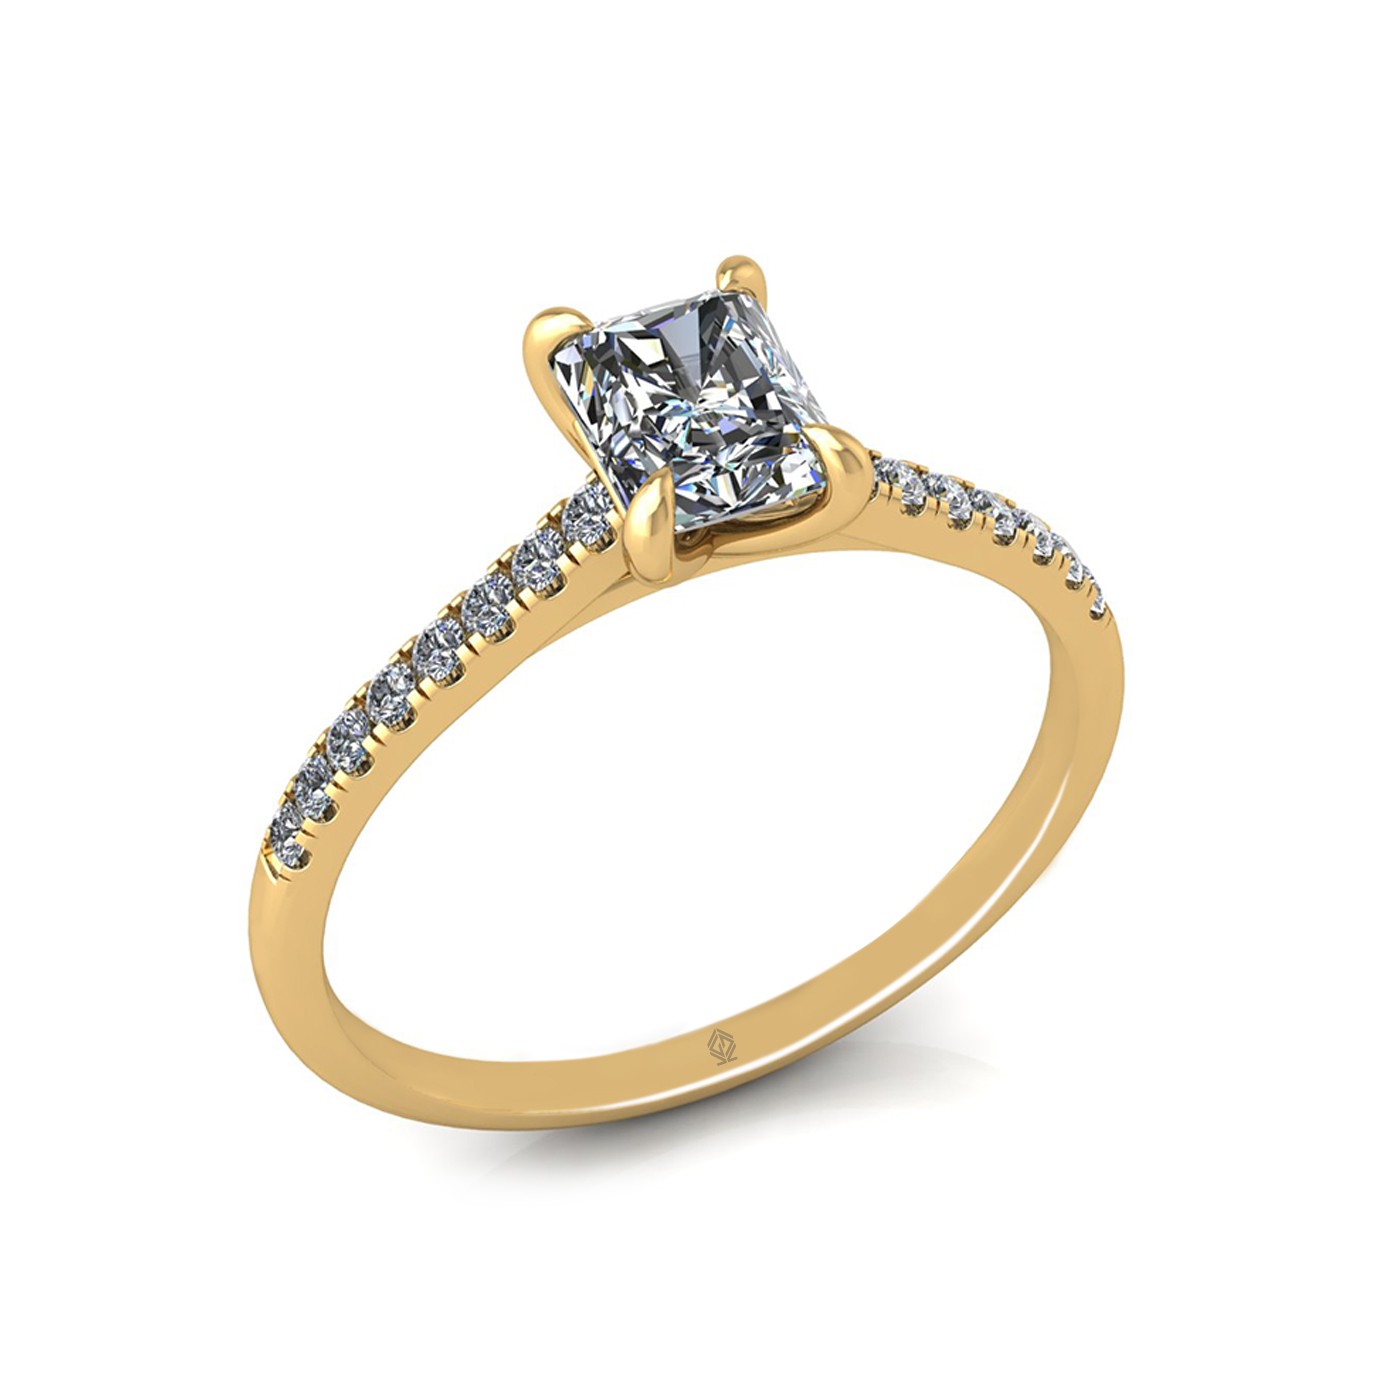 18k yellow gold  0,80 ct 4 prongs radiant cut diamond engagement ring with whisper thin pavÉ set band